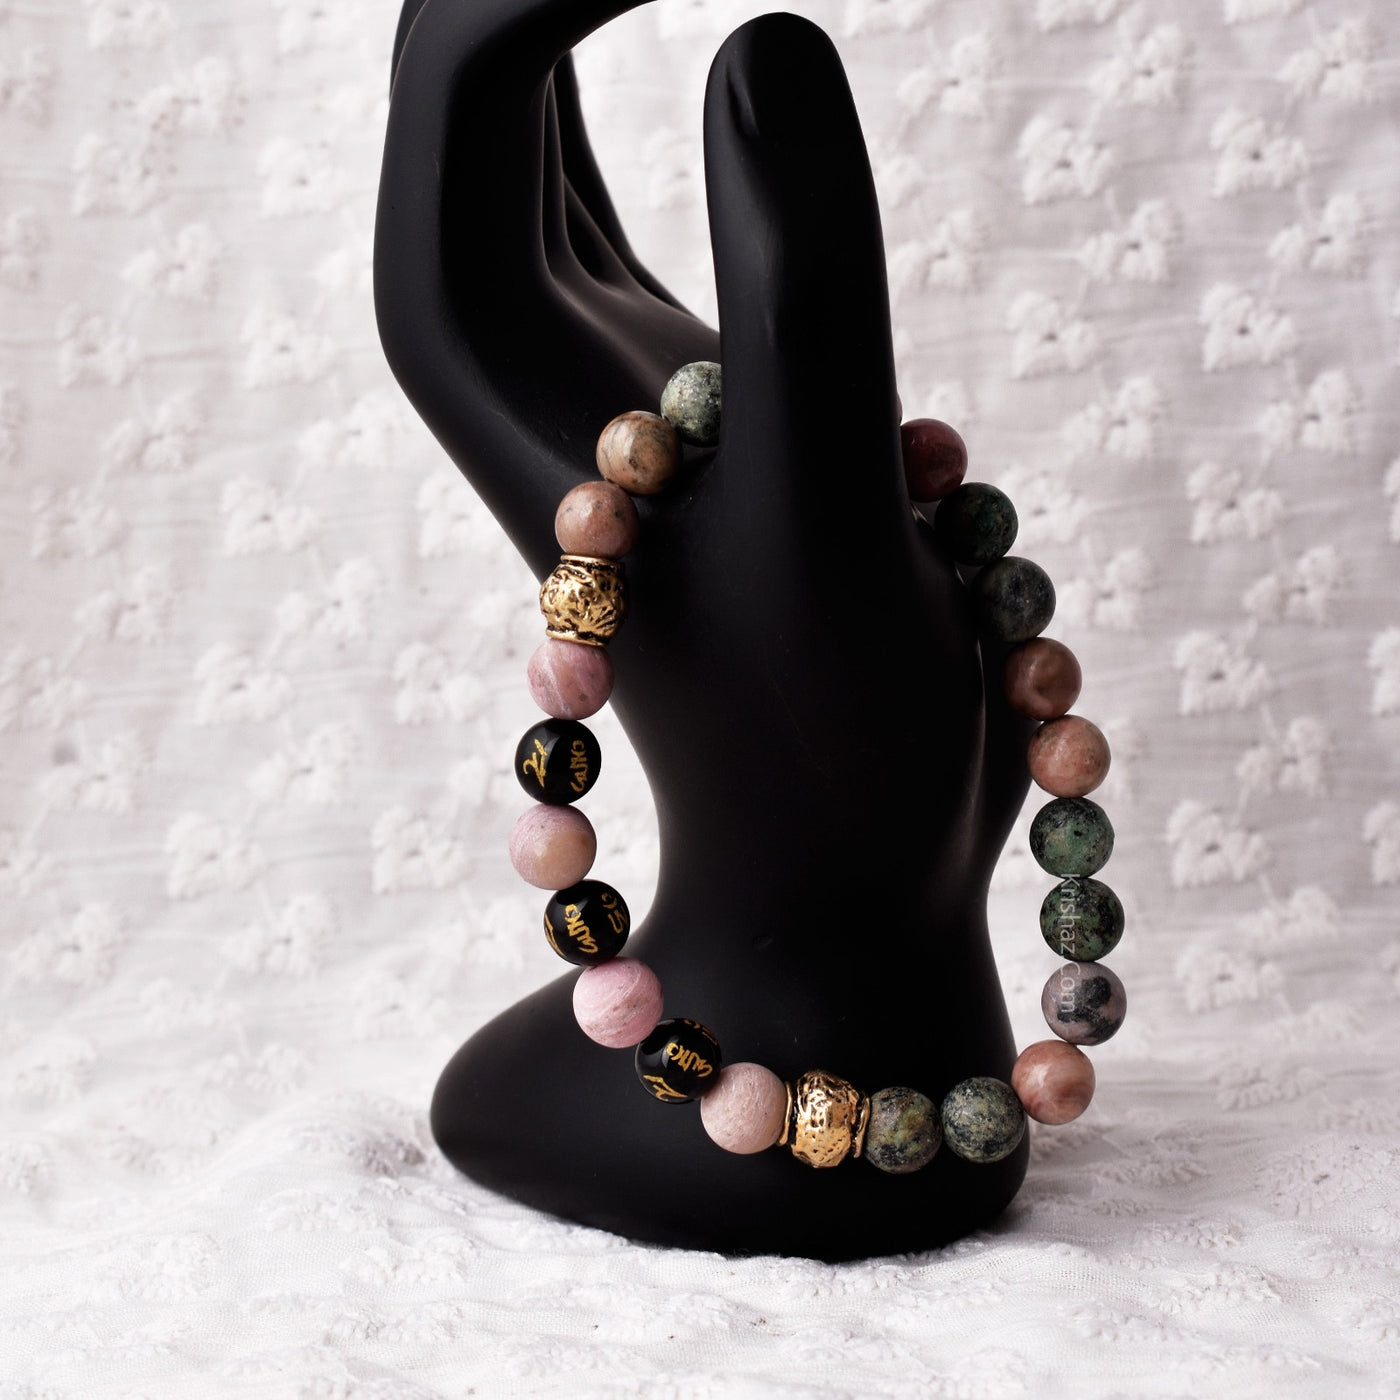 Round Beaded Stretch Bracelet, 8mm Natural Rhodonite with Om Mani Beads and African Jasper Bead Stretchable Bracelet